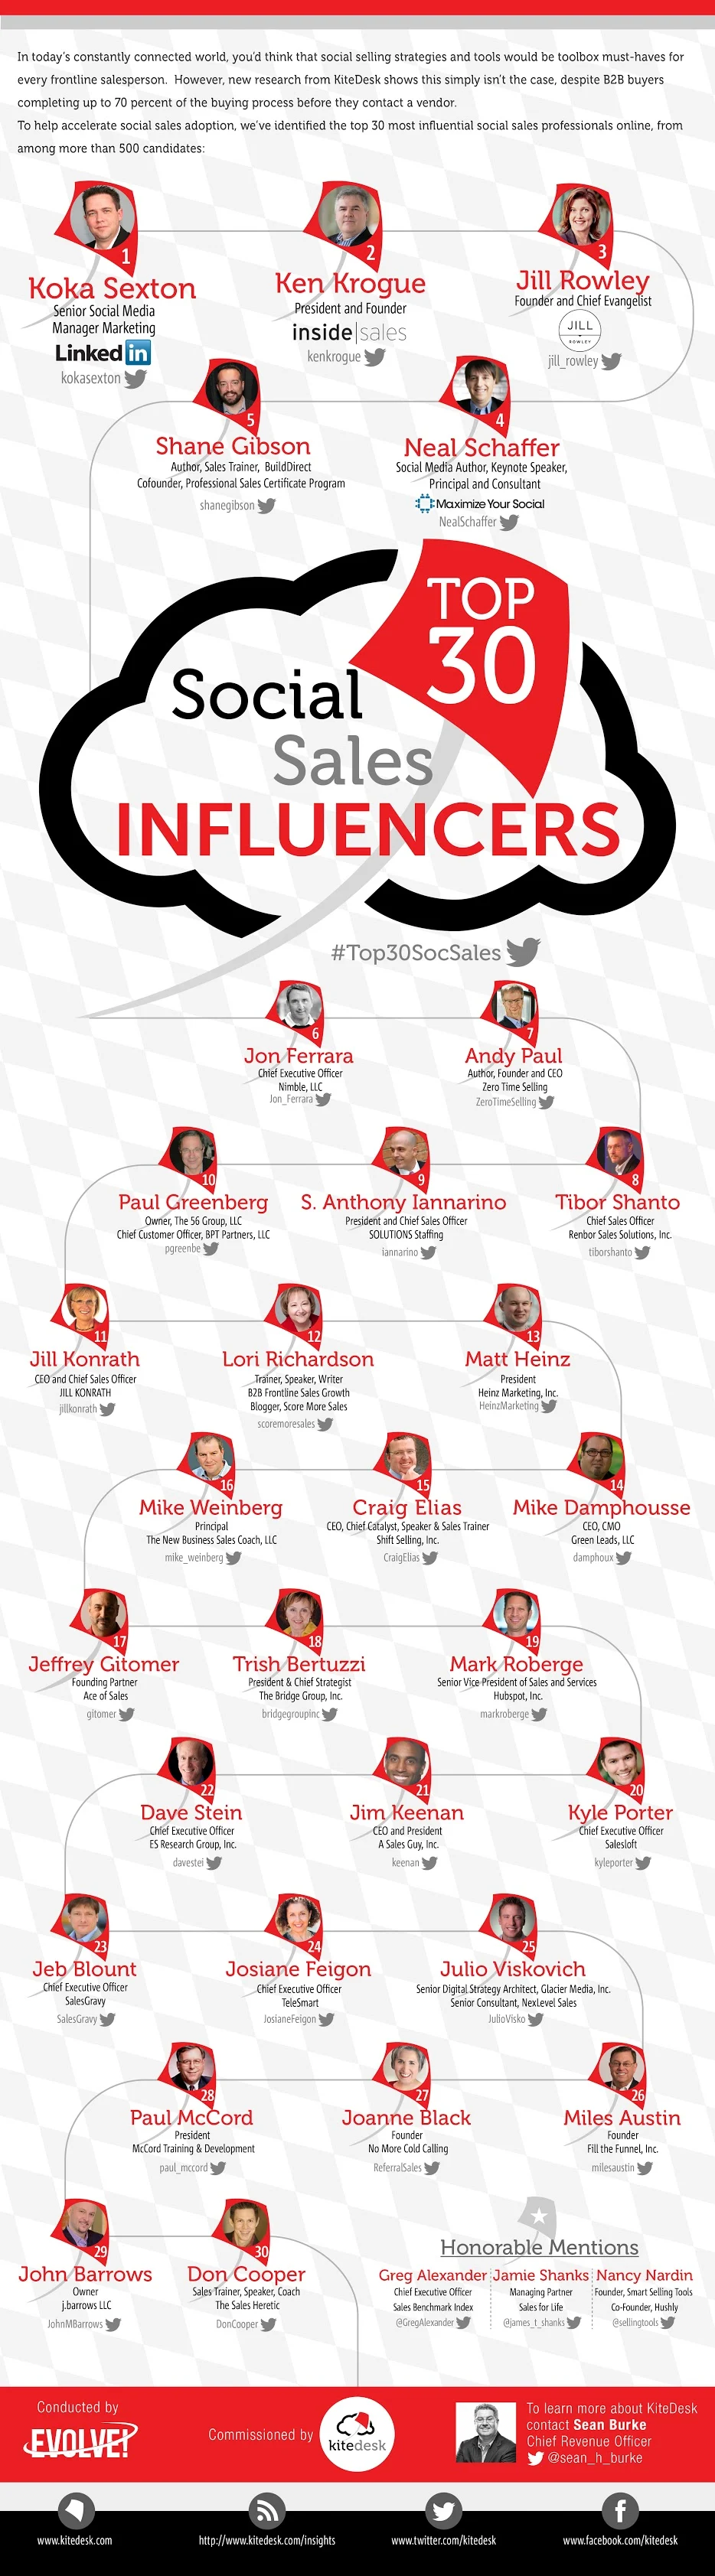 Top 30 Social Selling Influencers - infographic